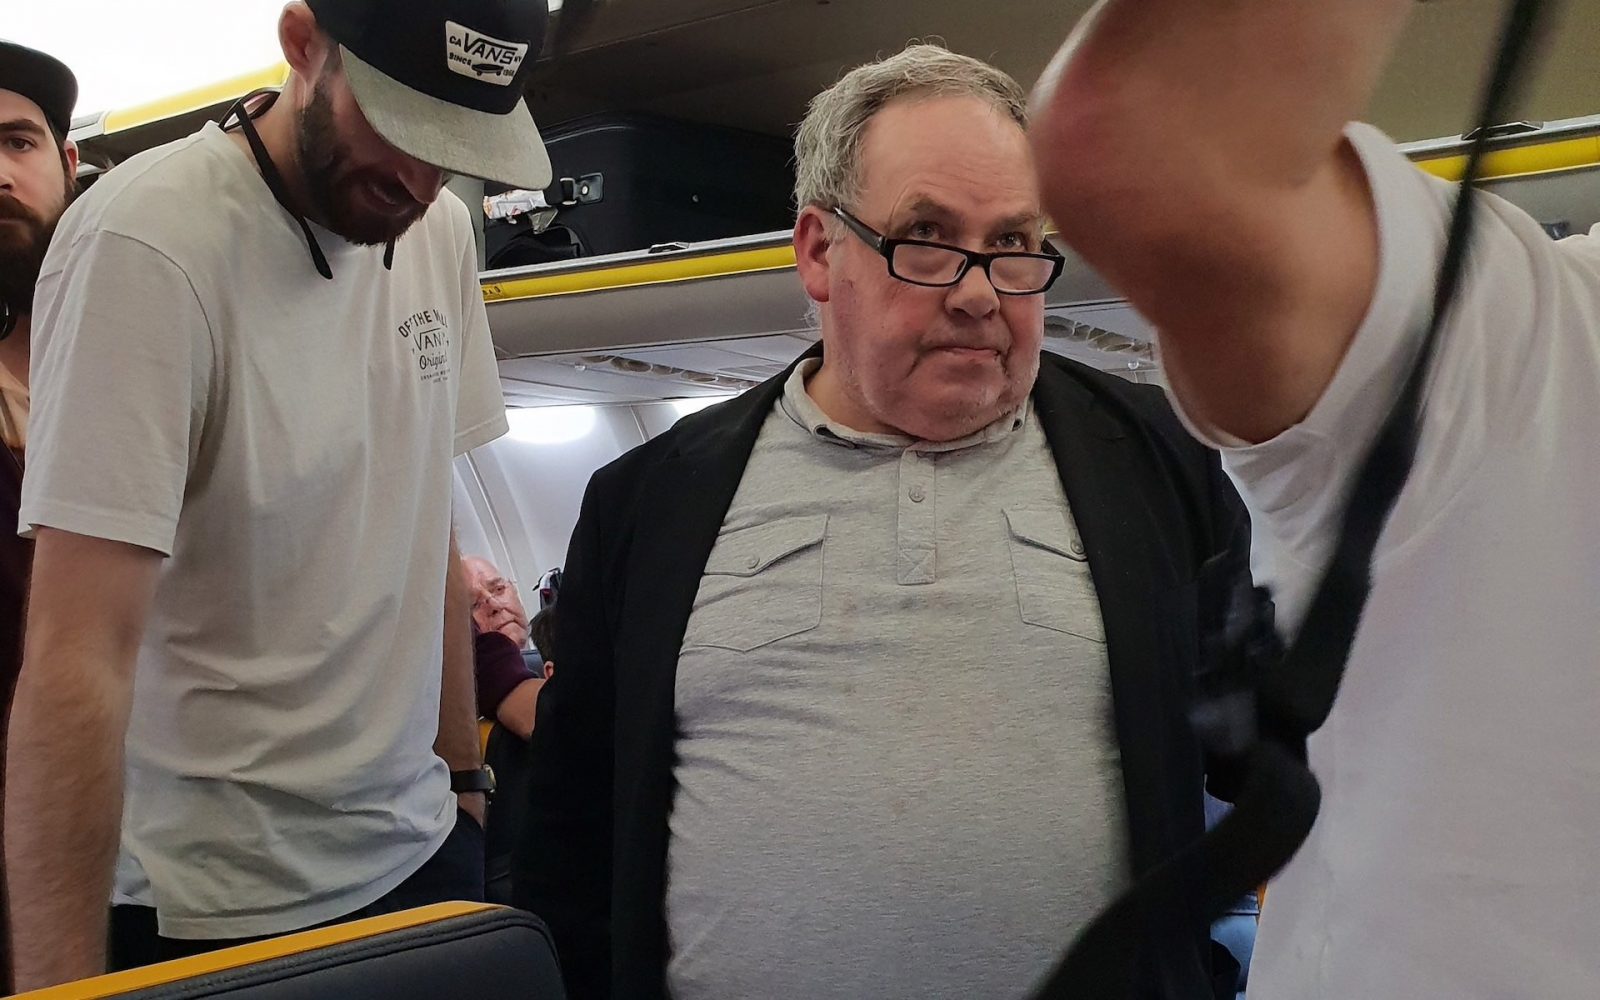 When an Airline Puts an On-Time Departure Ahead of a Racist Thug: Ryanair Faces Some Tough Questions